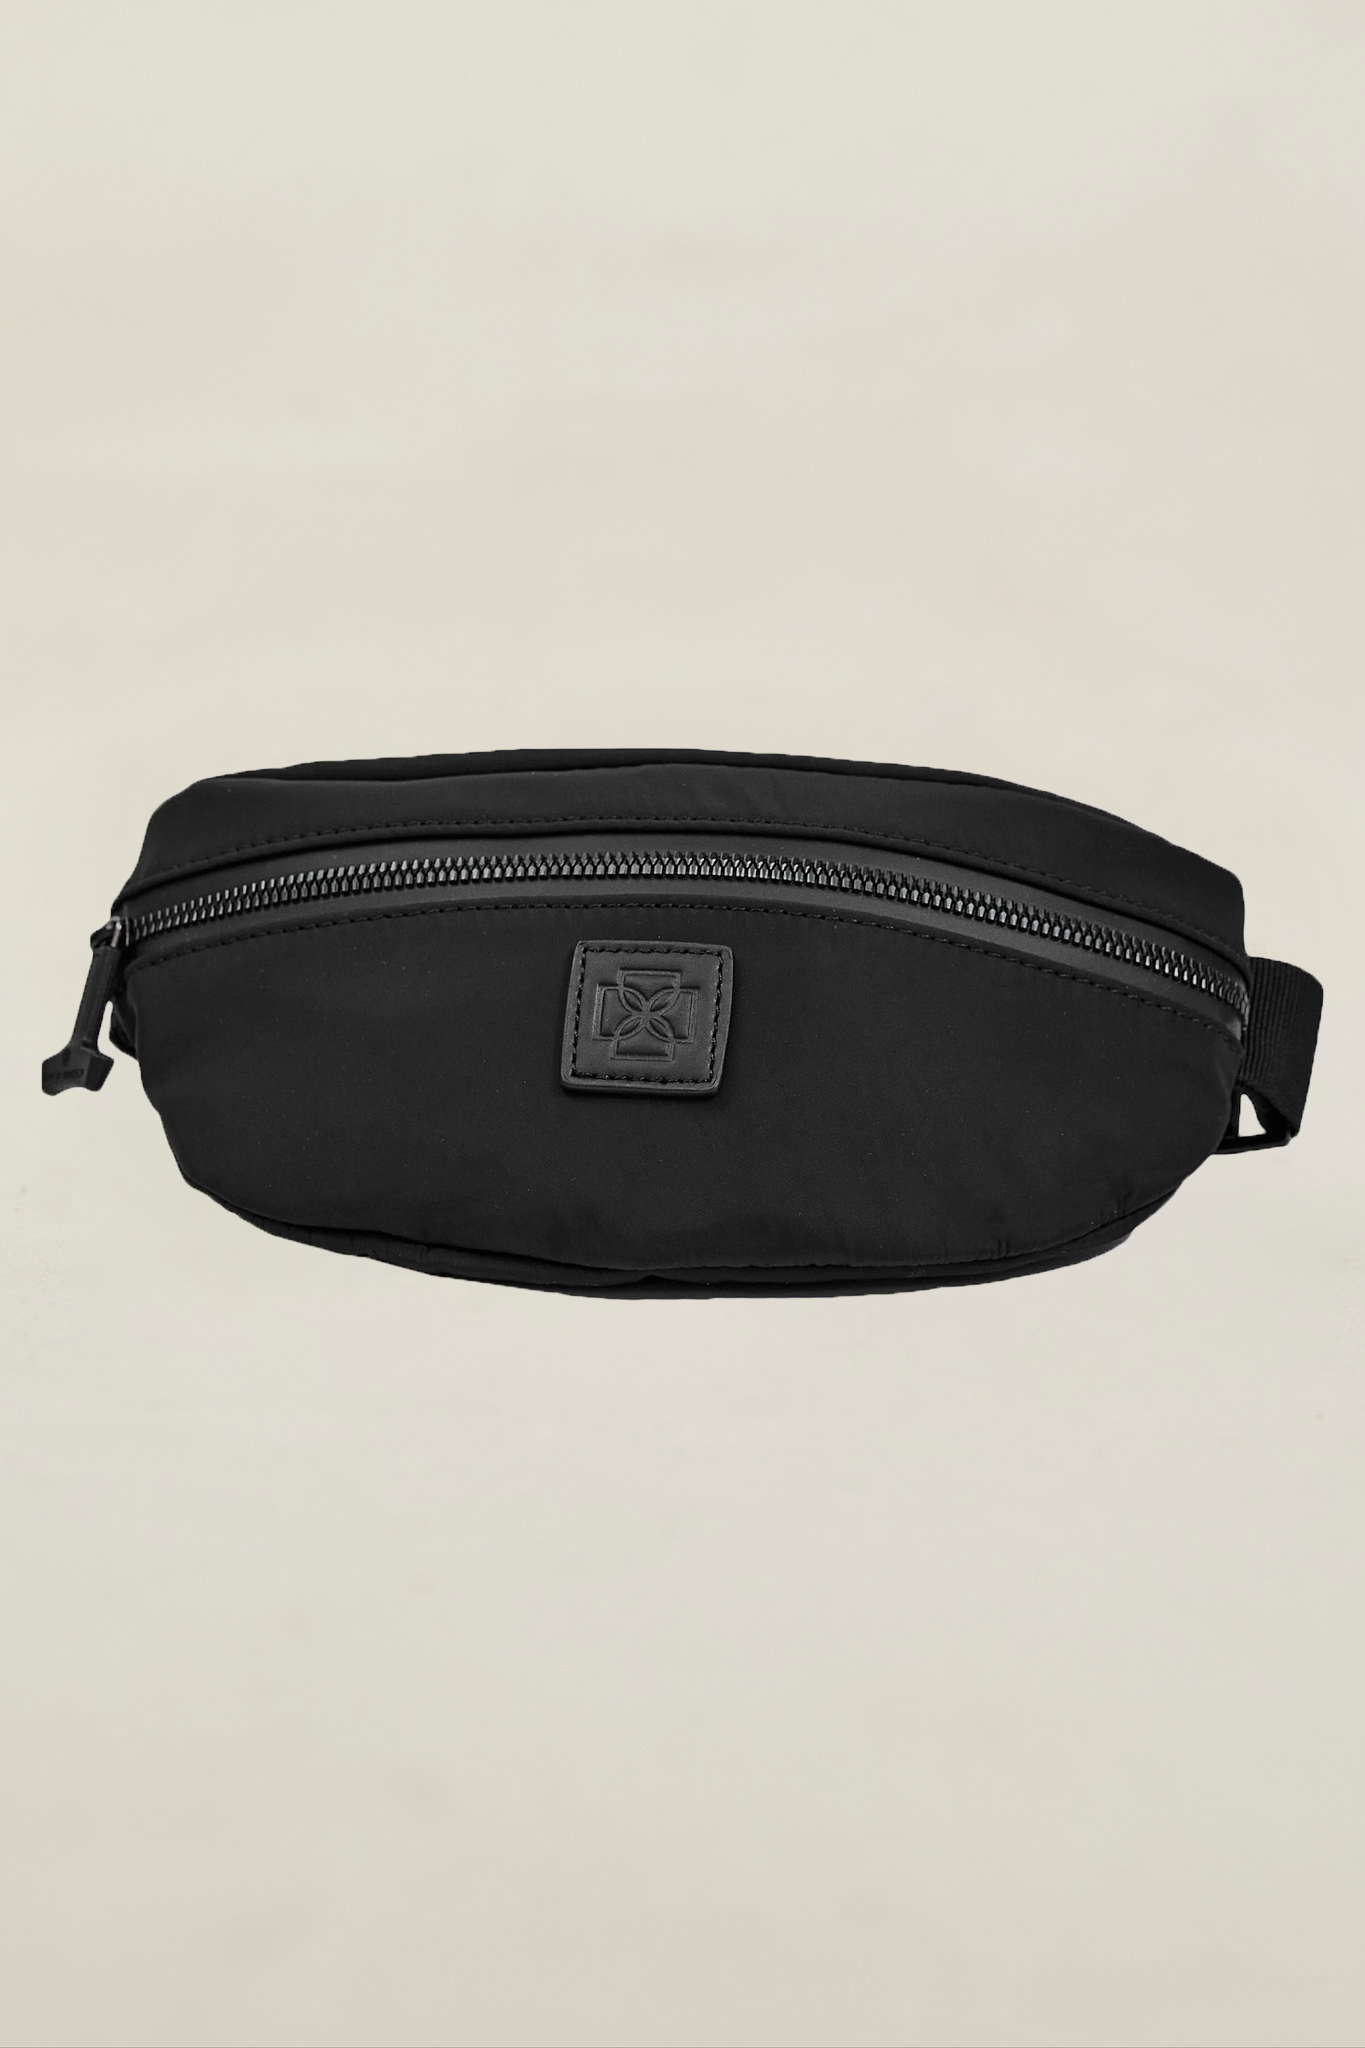 Can You Wear a Fanny Pack?